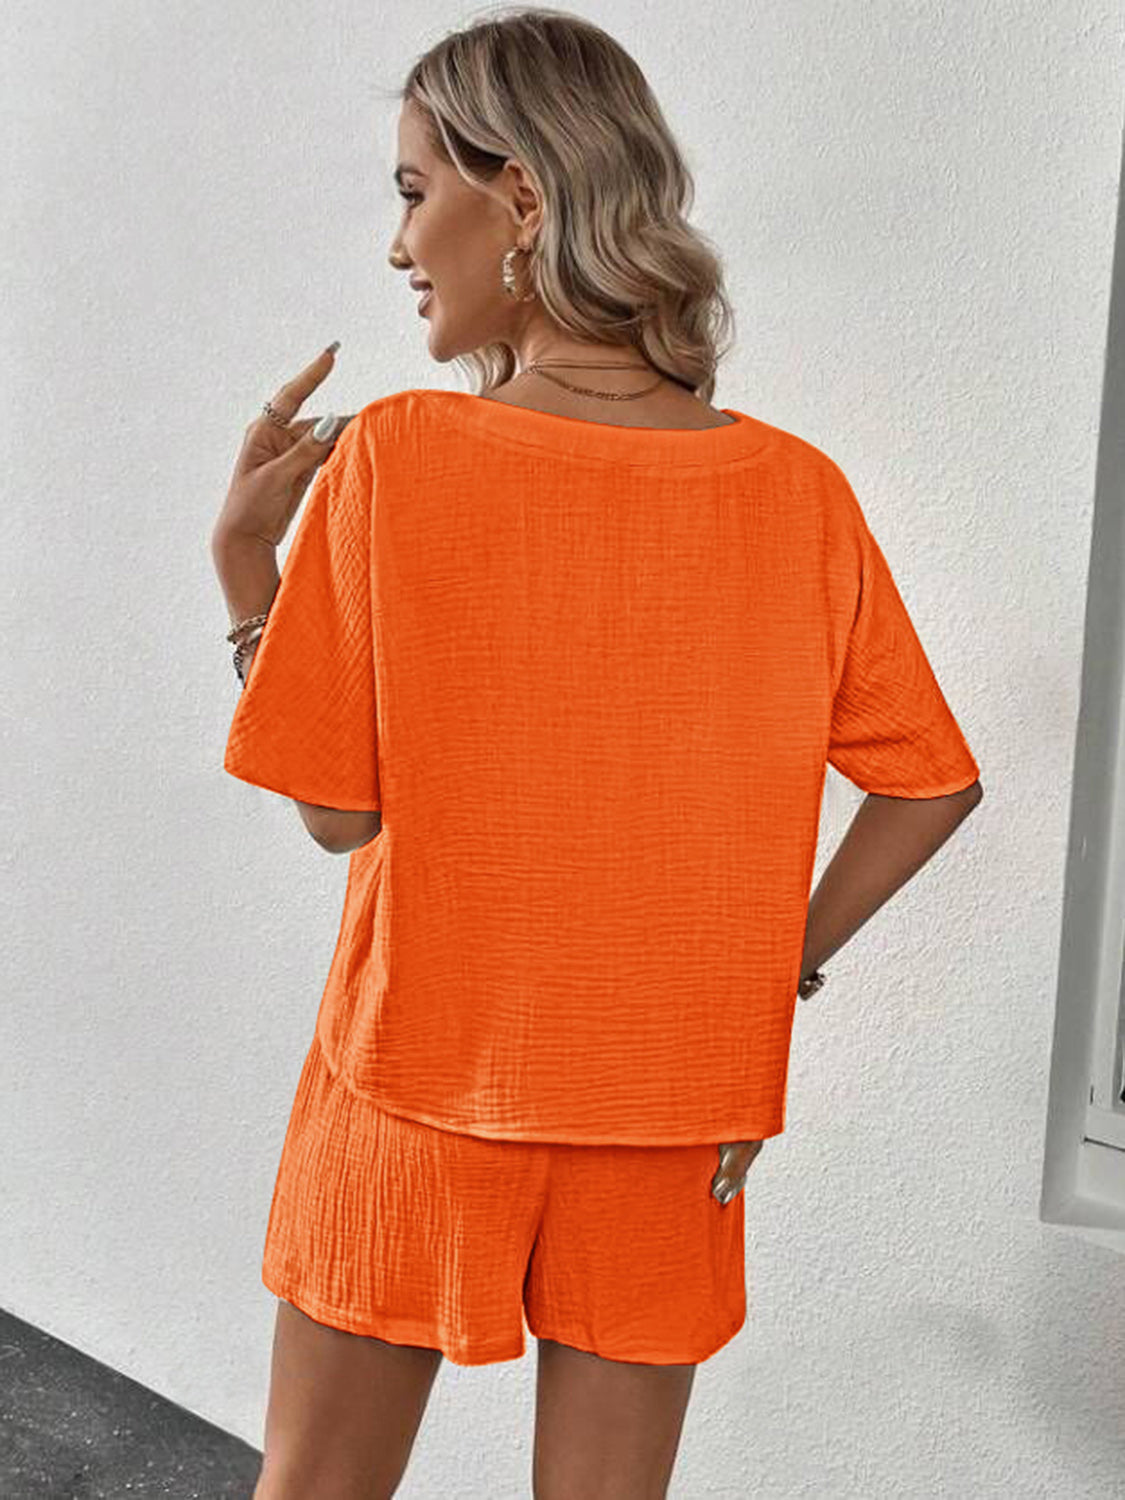 Chic V-Neck Top & Shorts Set in 5 colors. Perfect blend of style & comfort for a casual chic look. Ideal for any relaxed occasion.